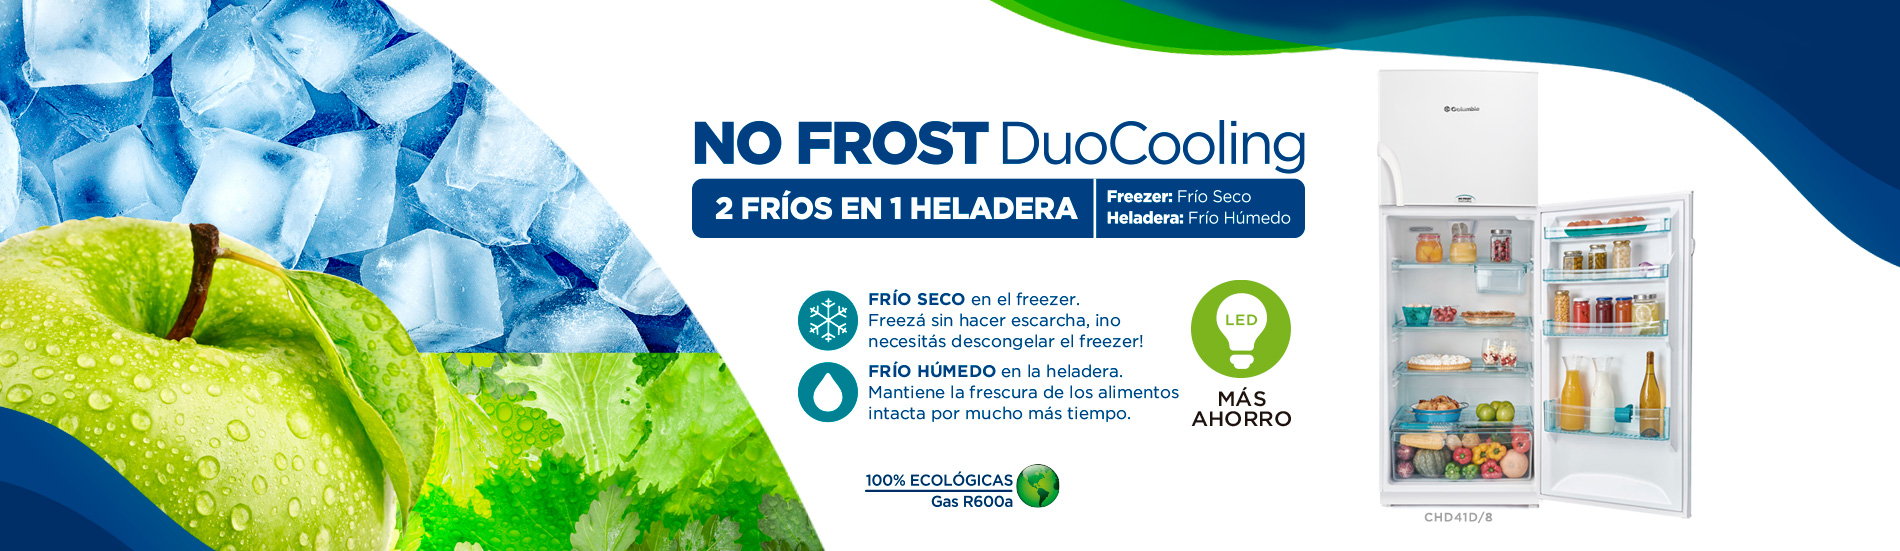 NO FROST DuoCooling 